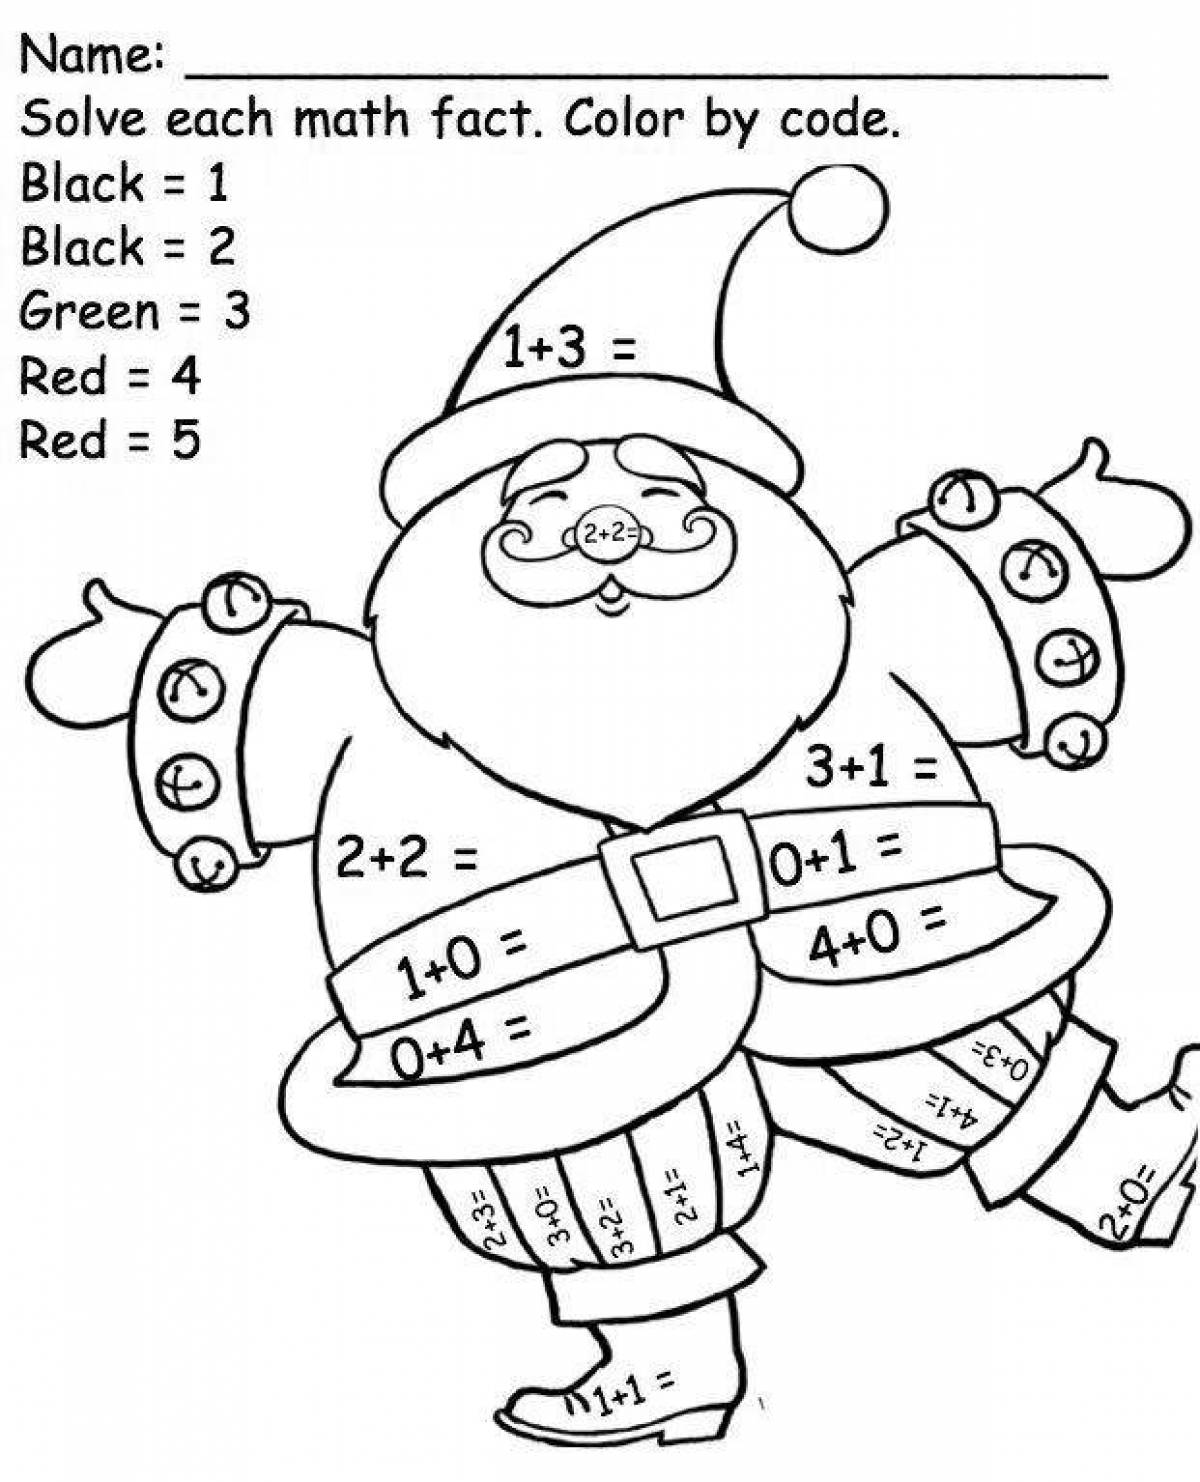 Living Santa Claus Color by Number